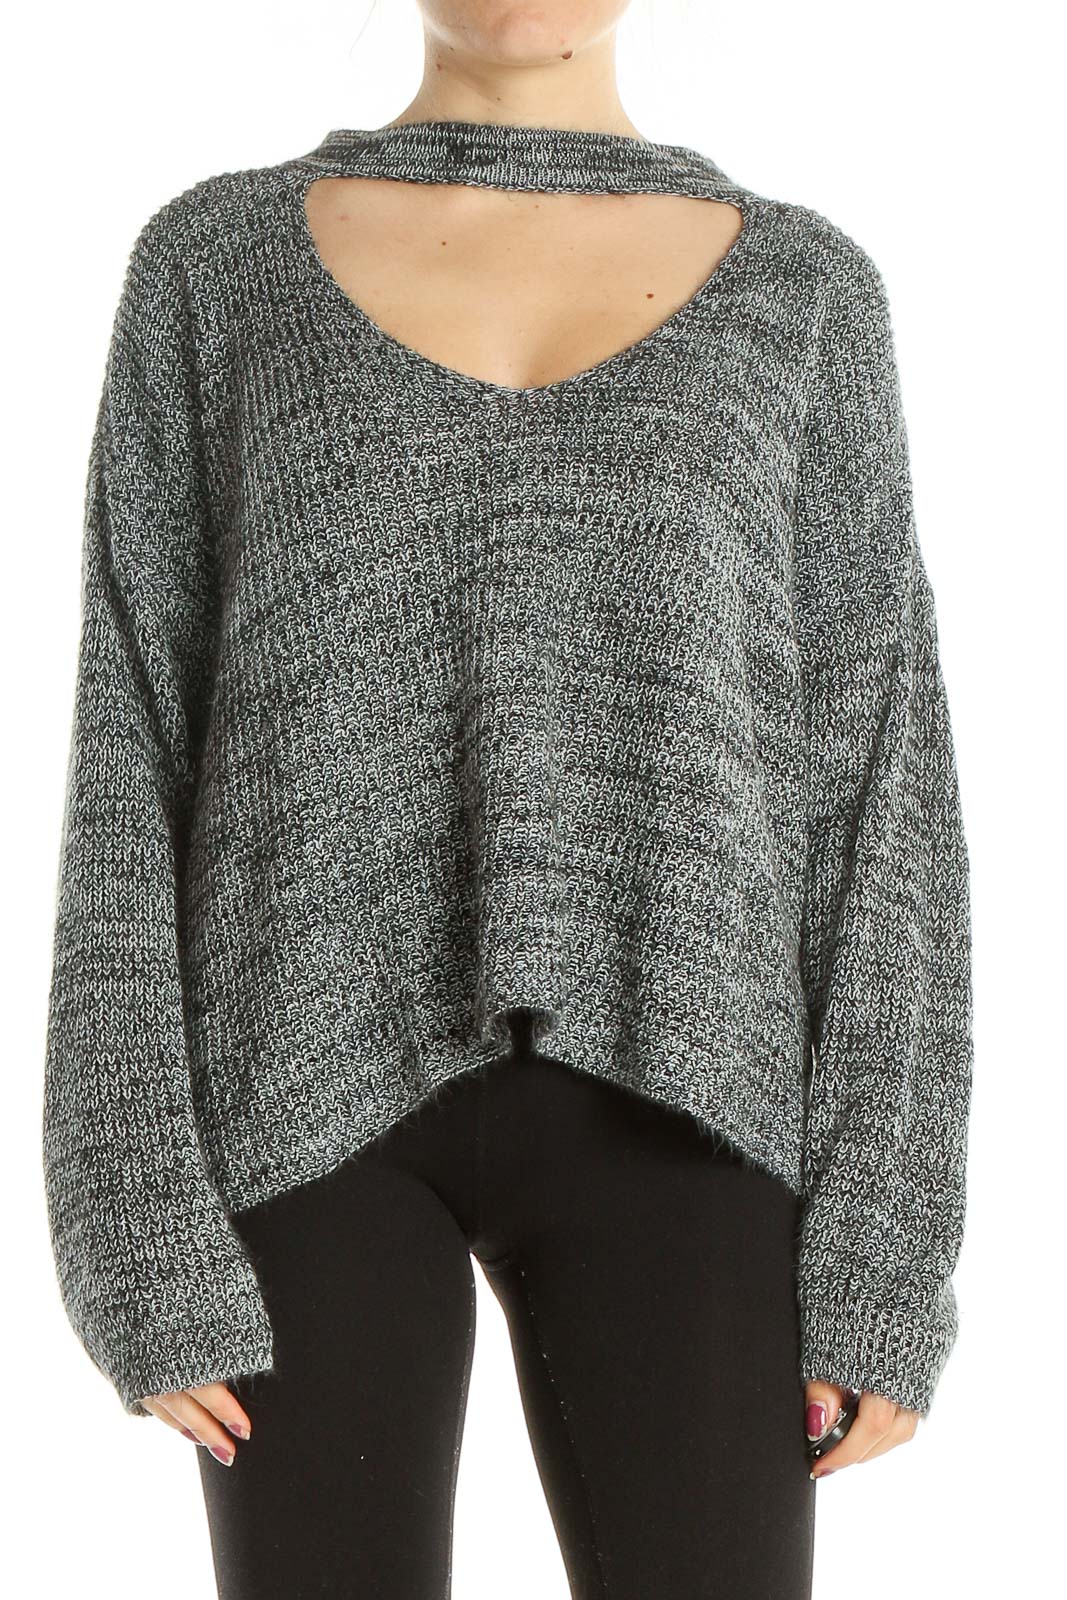 Gray Casual Cut Out Sweater Front